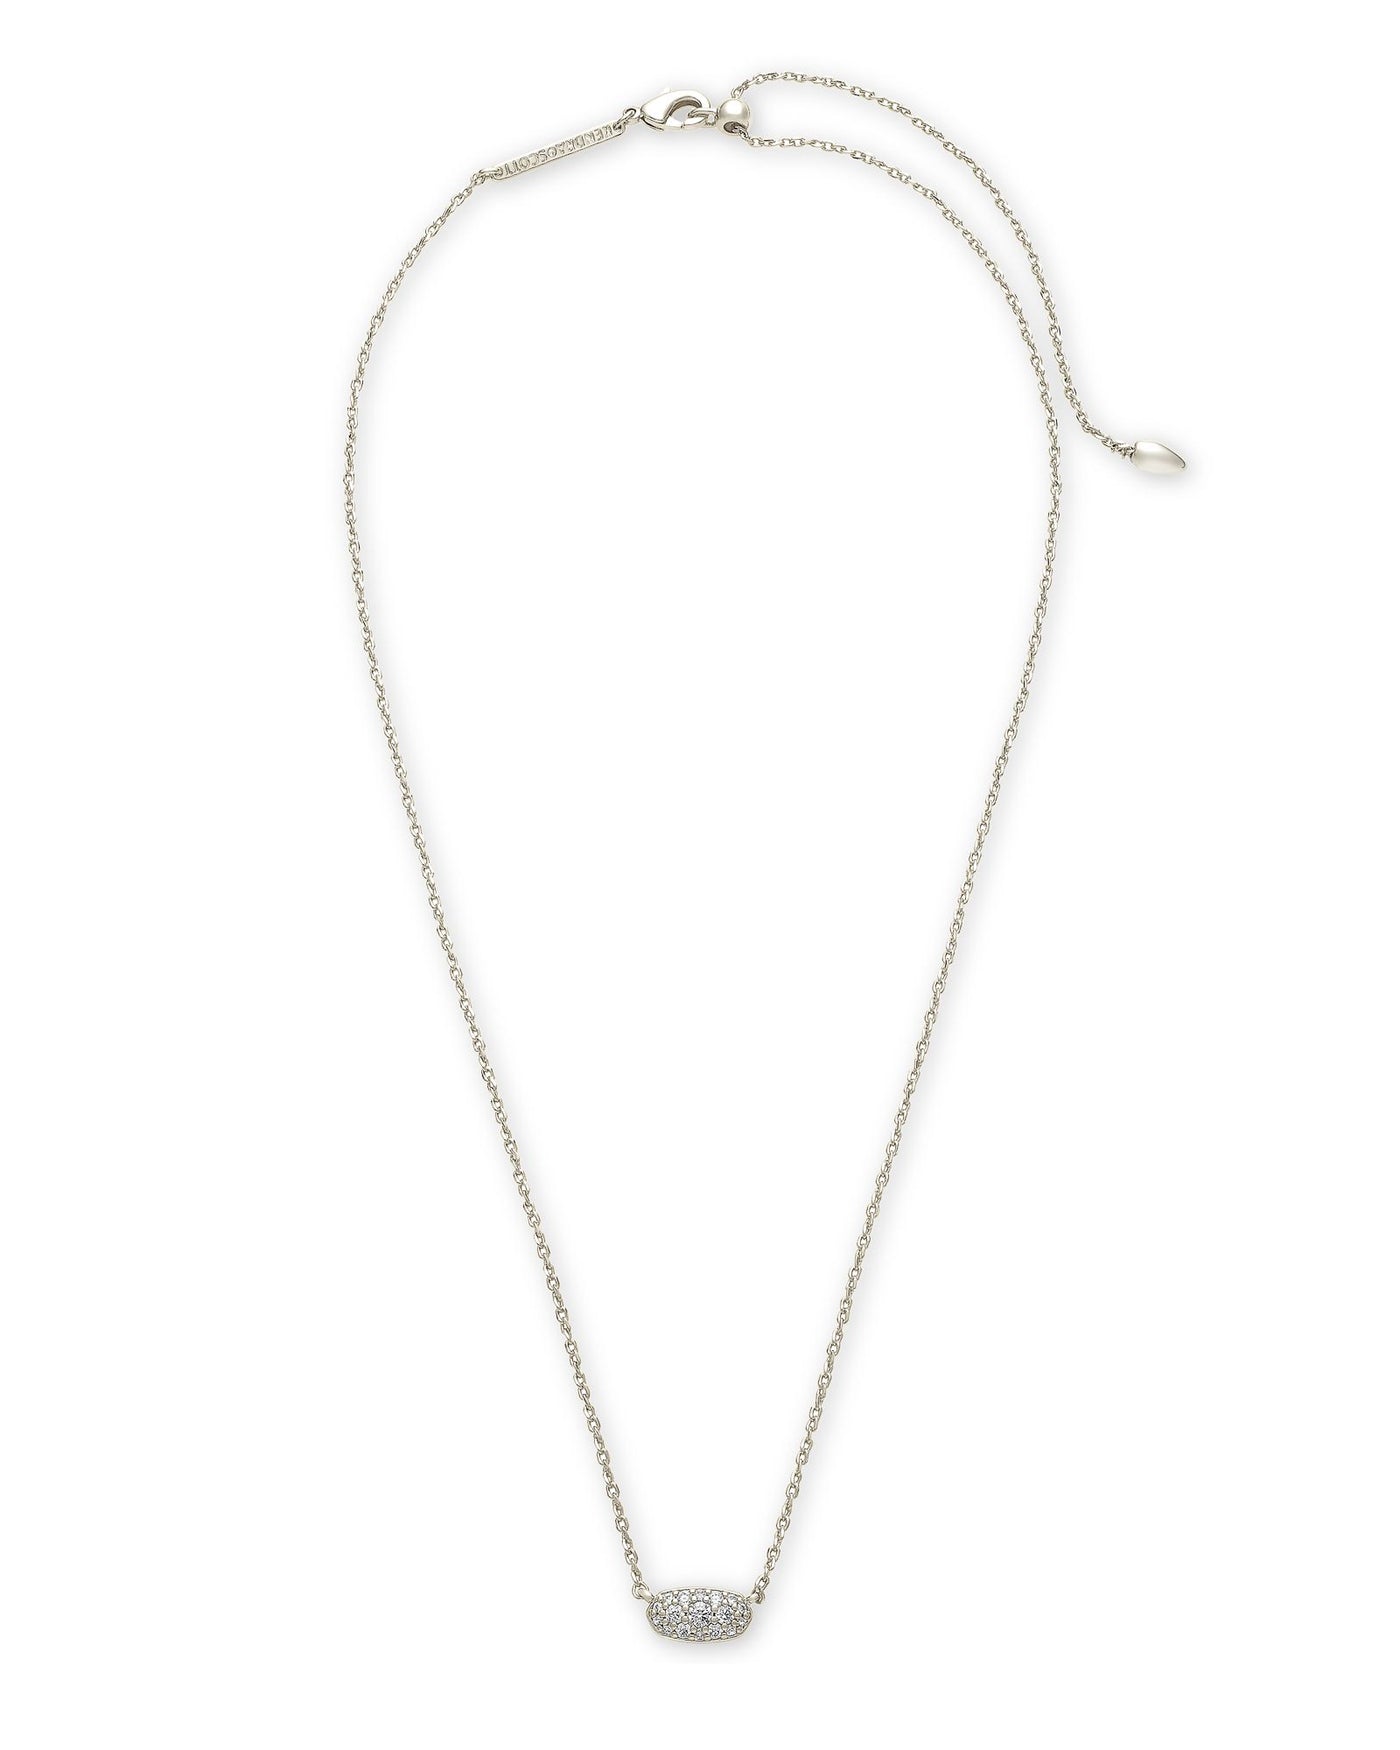 Kendra Scott Grayson Silver Pendant Necklace in White Crystal-Necklaces-Kendra Scott-Market Street Nest, Fashionable Clothing, Shoes and Home Décor Located in Mabank, TX